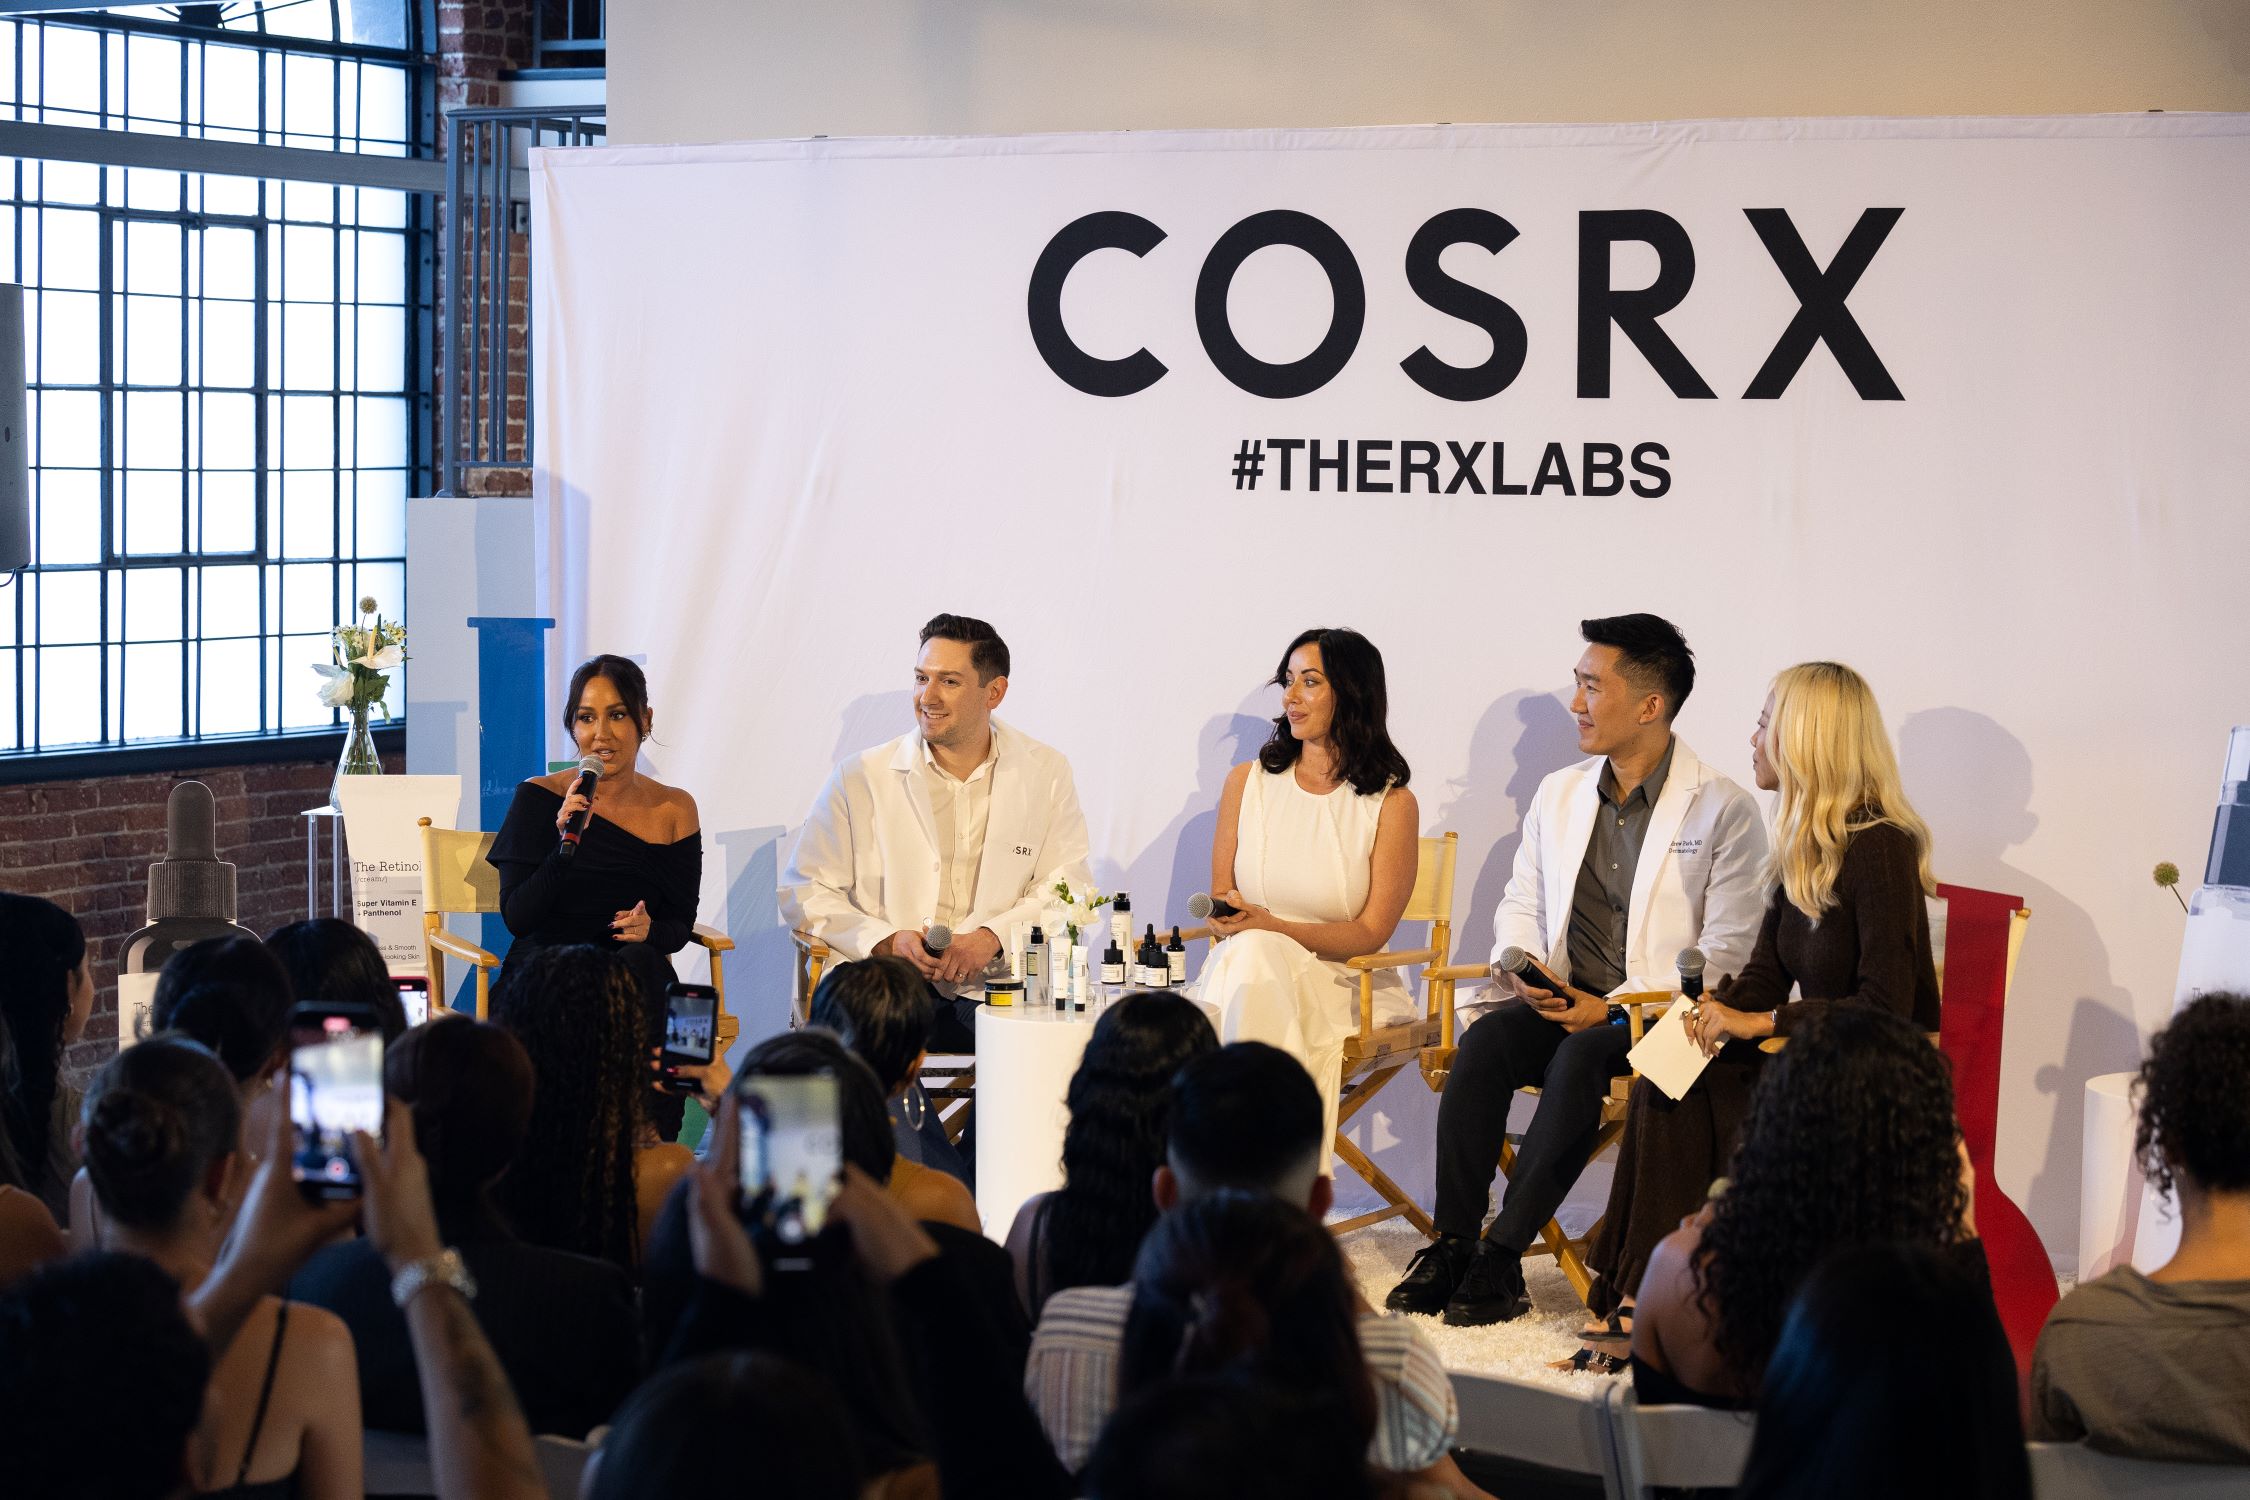 An image of the Panel at The RX Labs hosted by COSRX in Hollywood, CA.